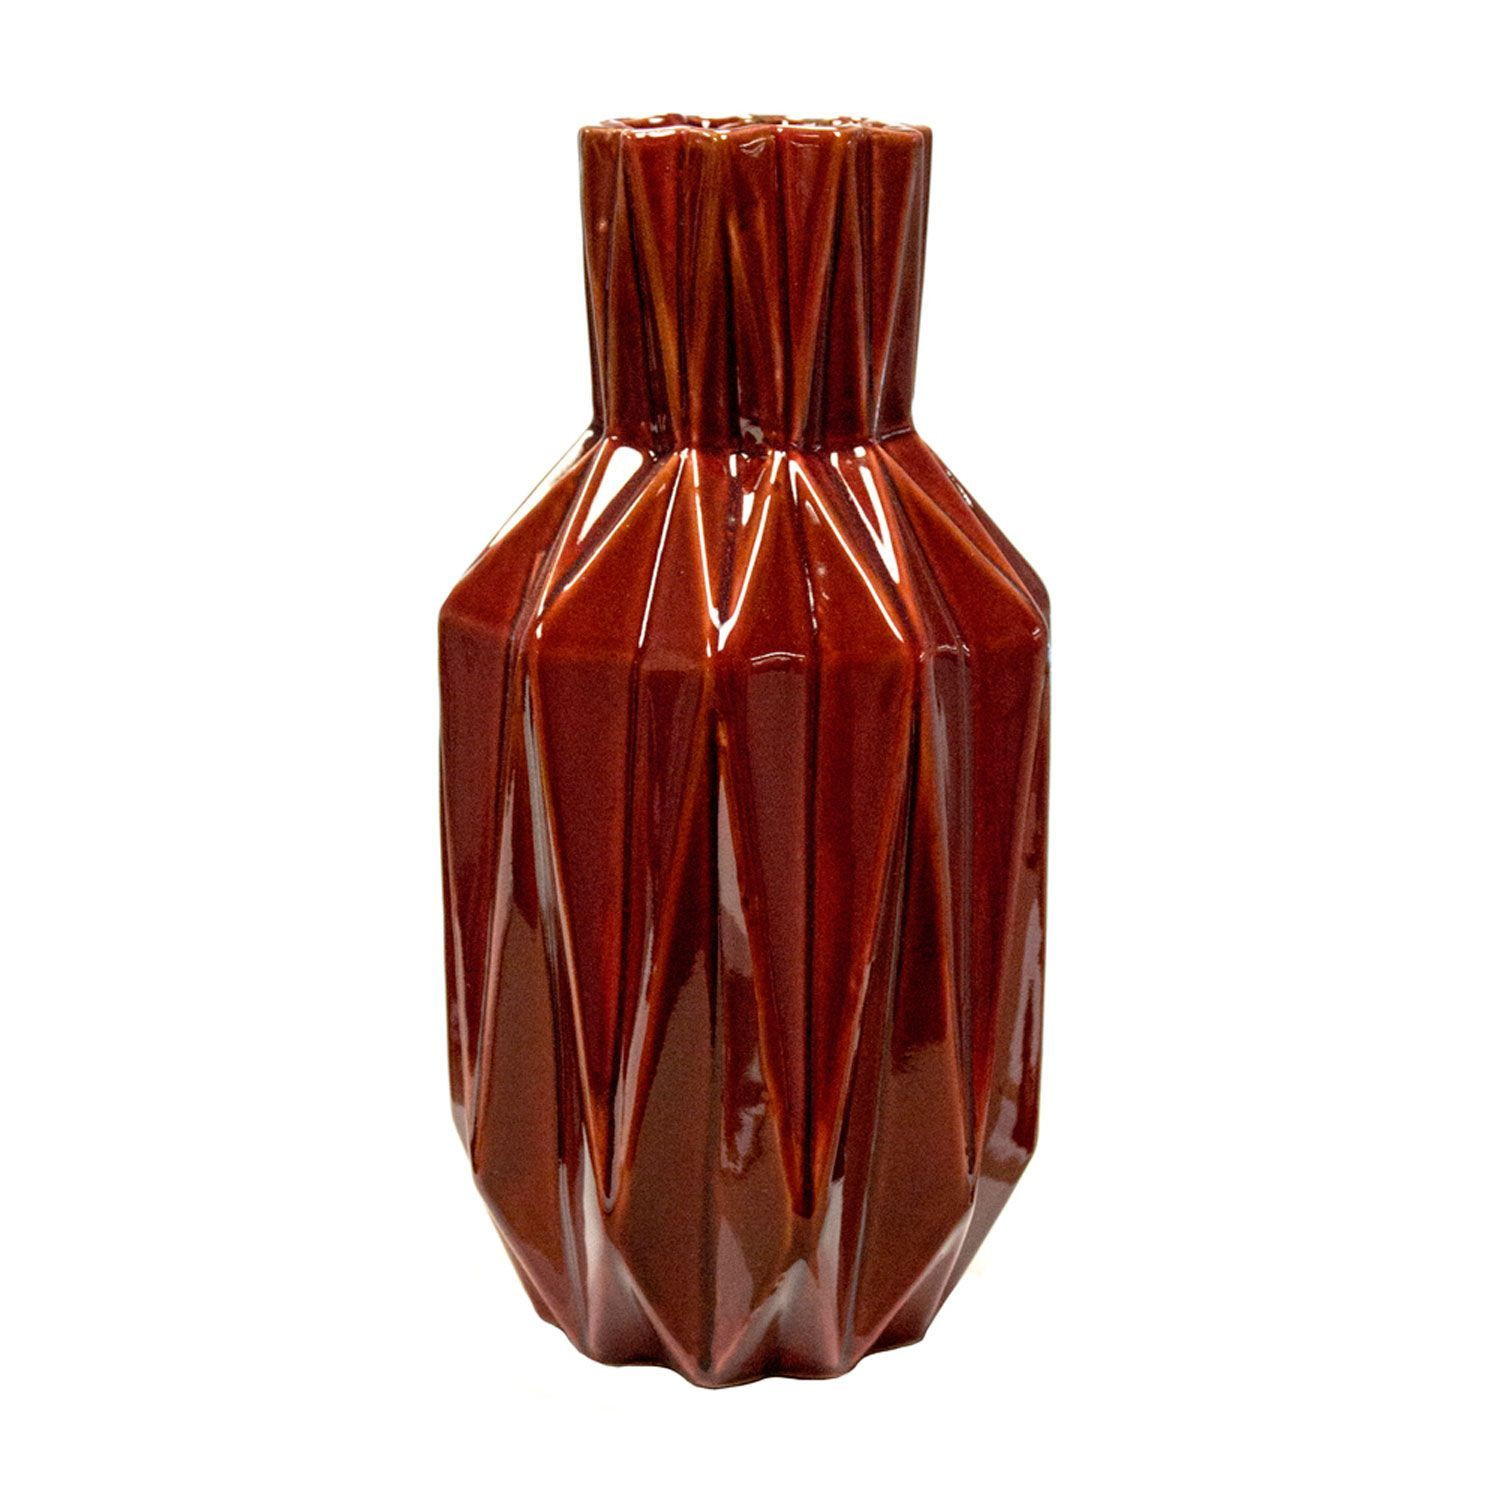 25 Popular 36 Glass Vase 2024 free download 36 glass vase of 36 tall red floor vase the weekly world throughout 36 tall red floor vase